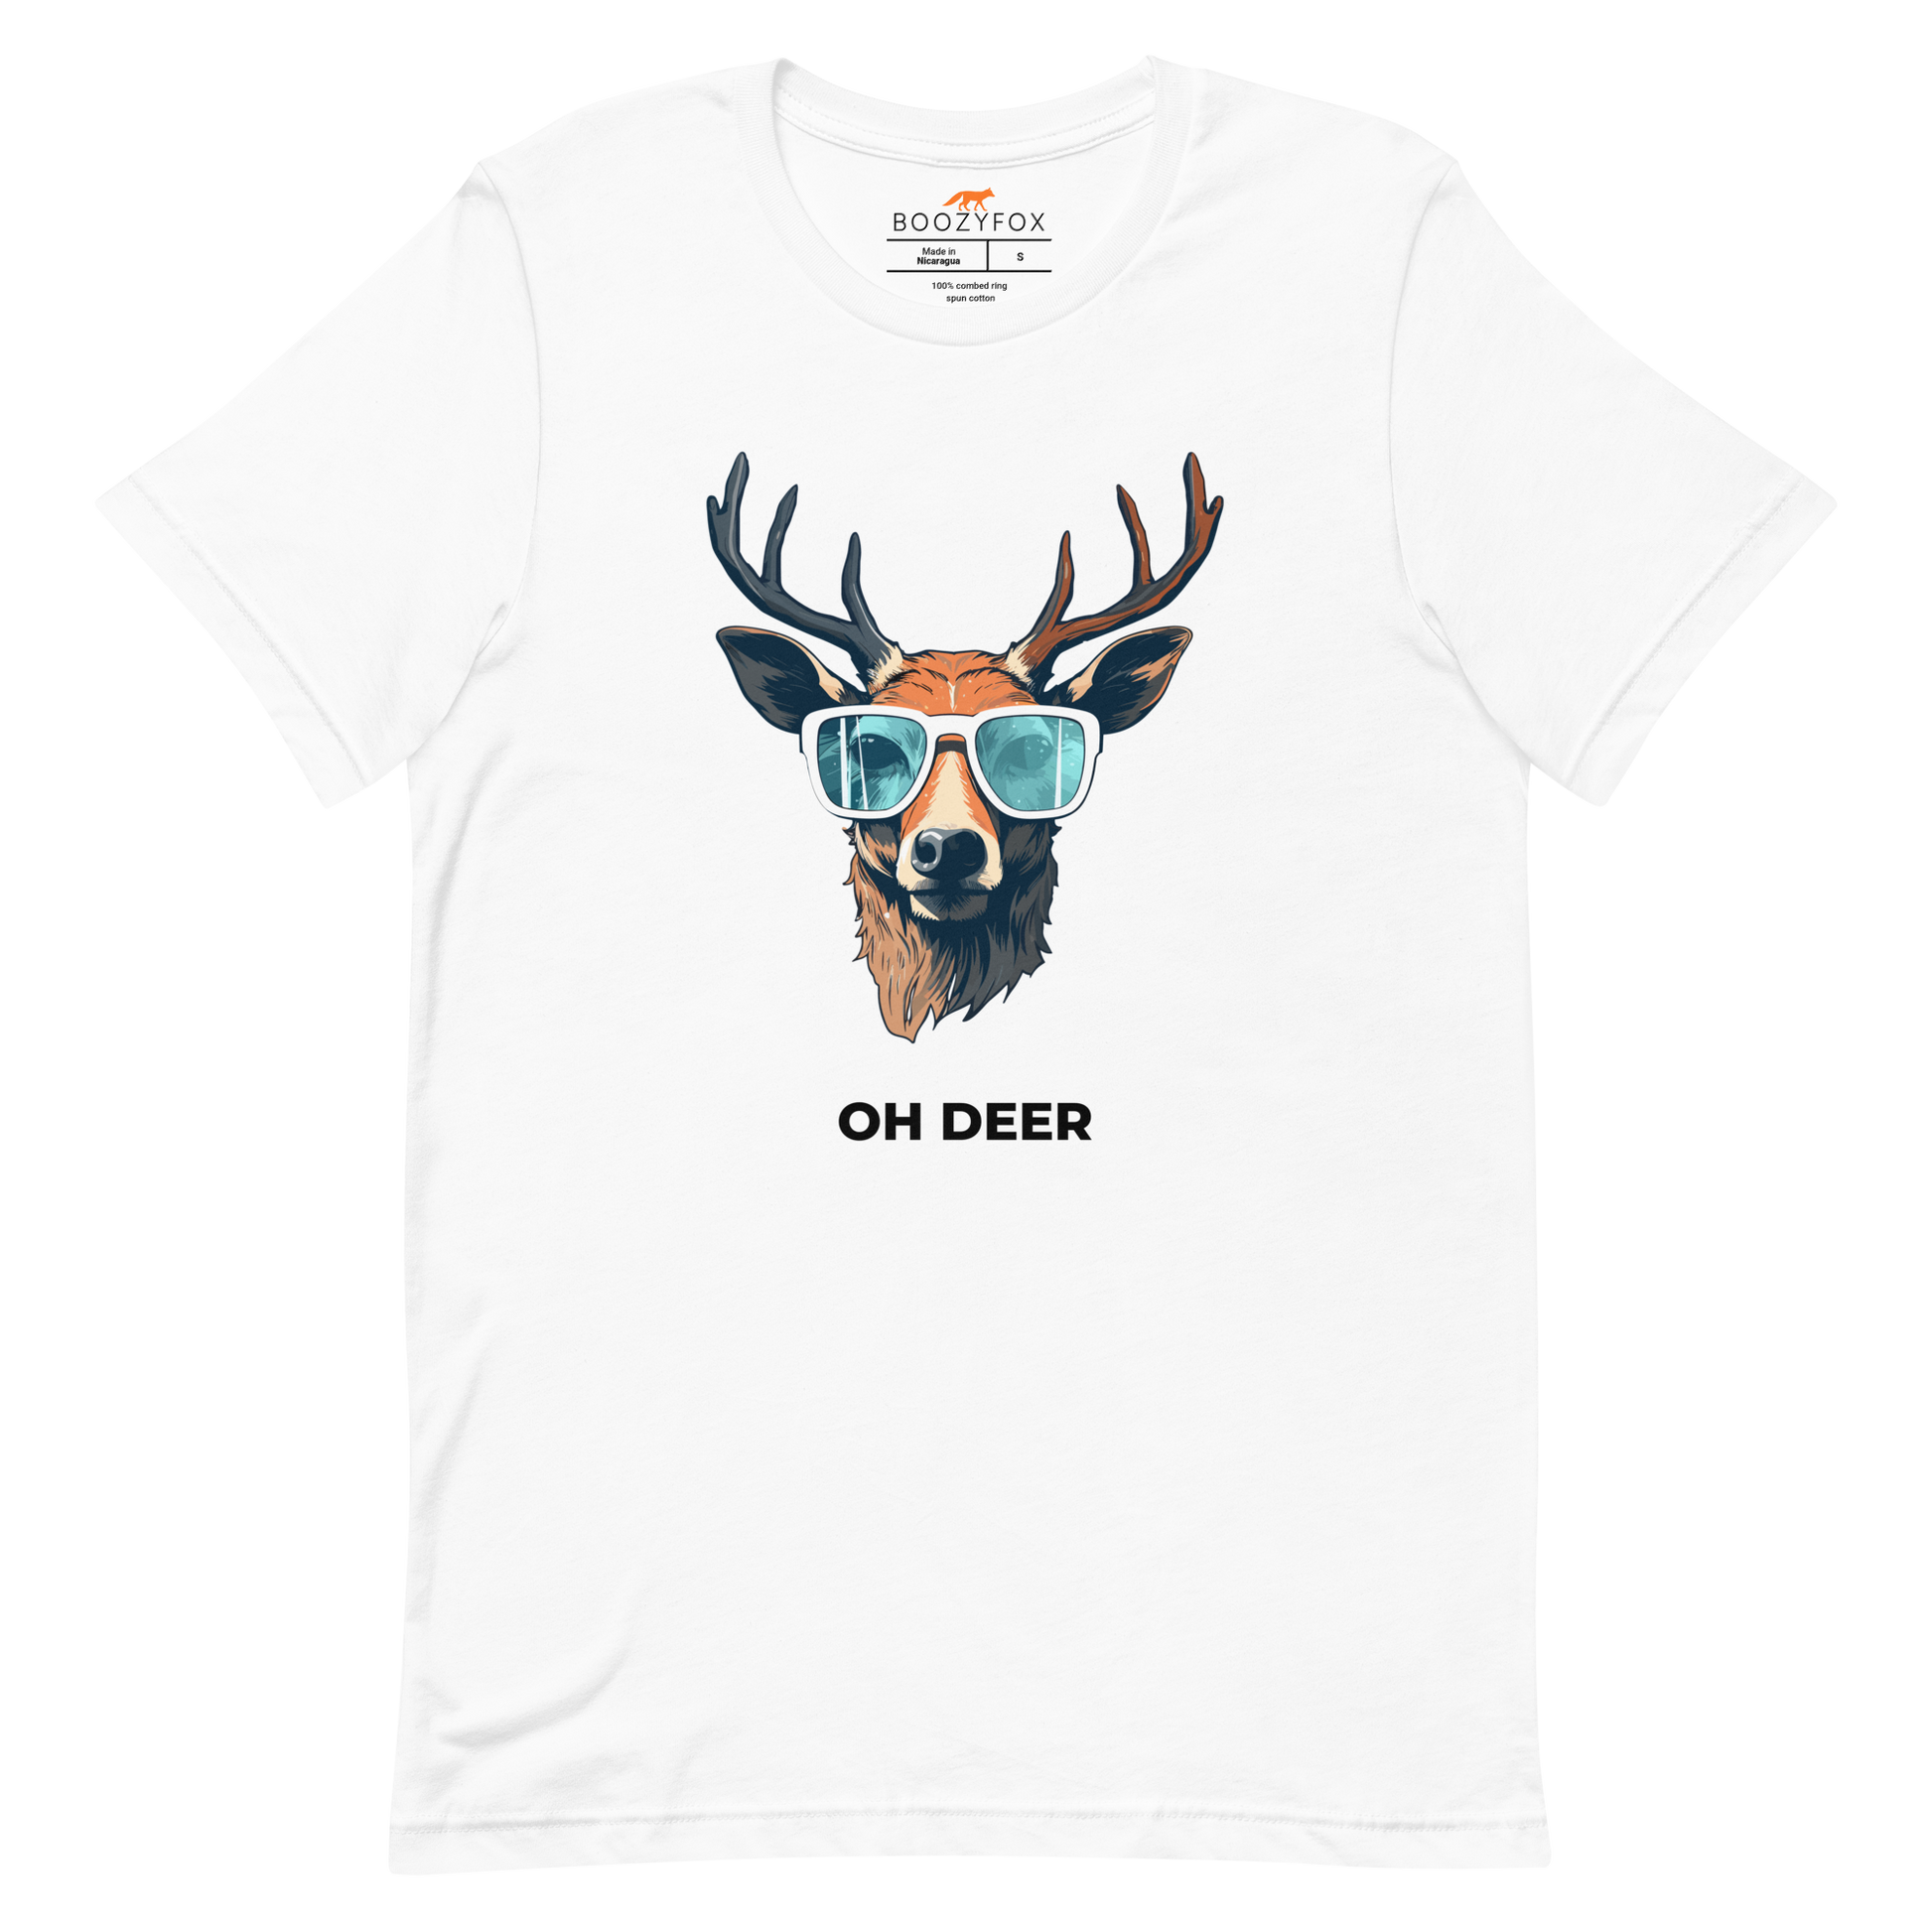 White Premium Deer T-Shirt featuring a hilarious Oh Deer graphic on the chest - Funny Graphic Deer Tees - Boozy Fox